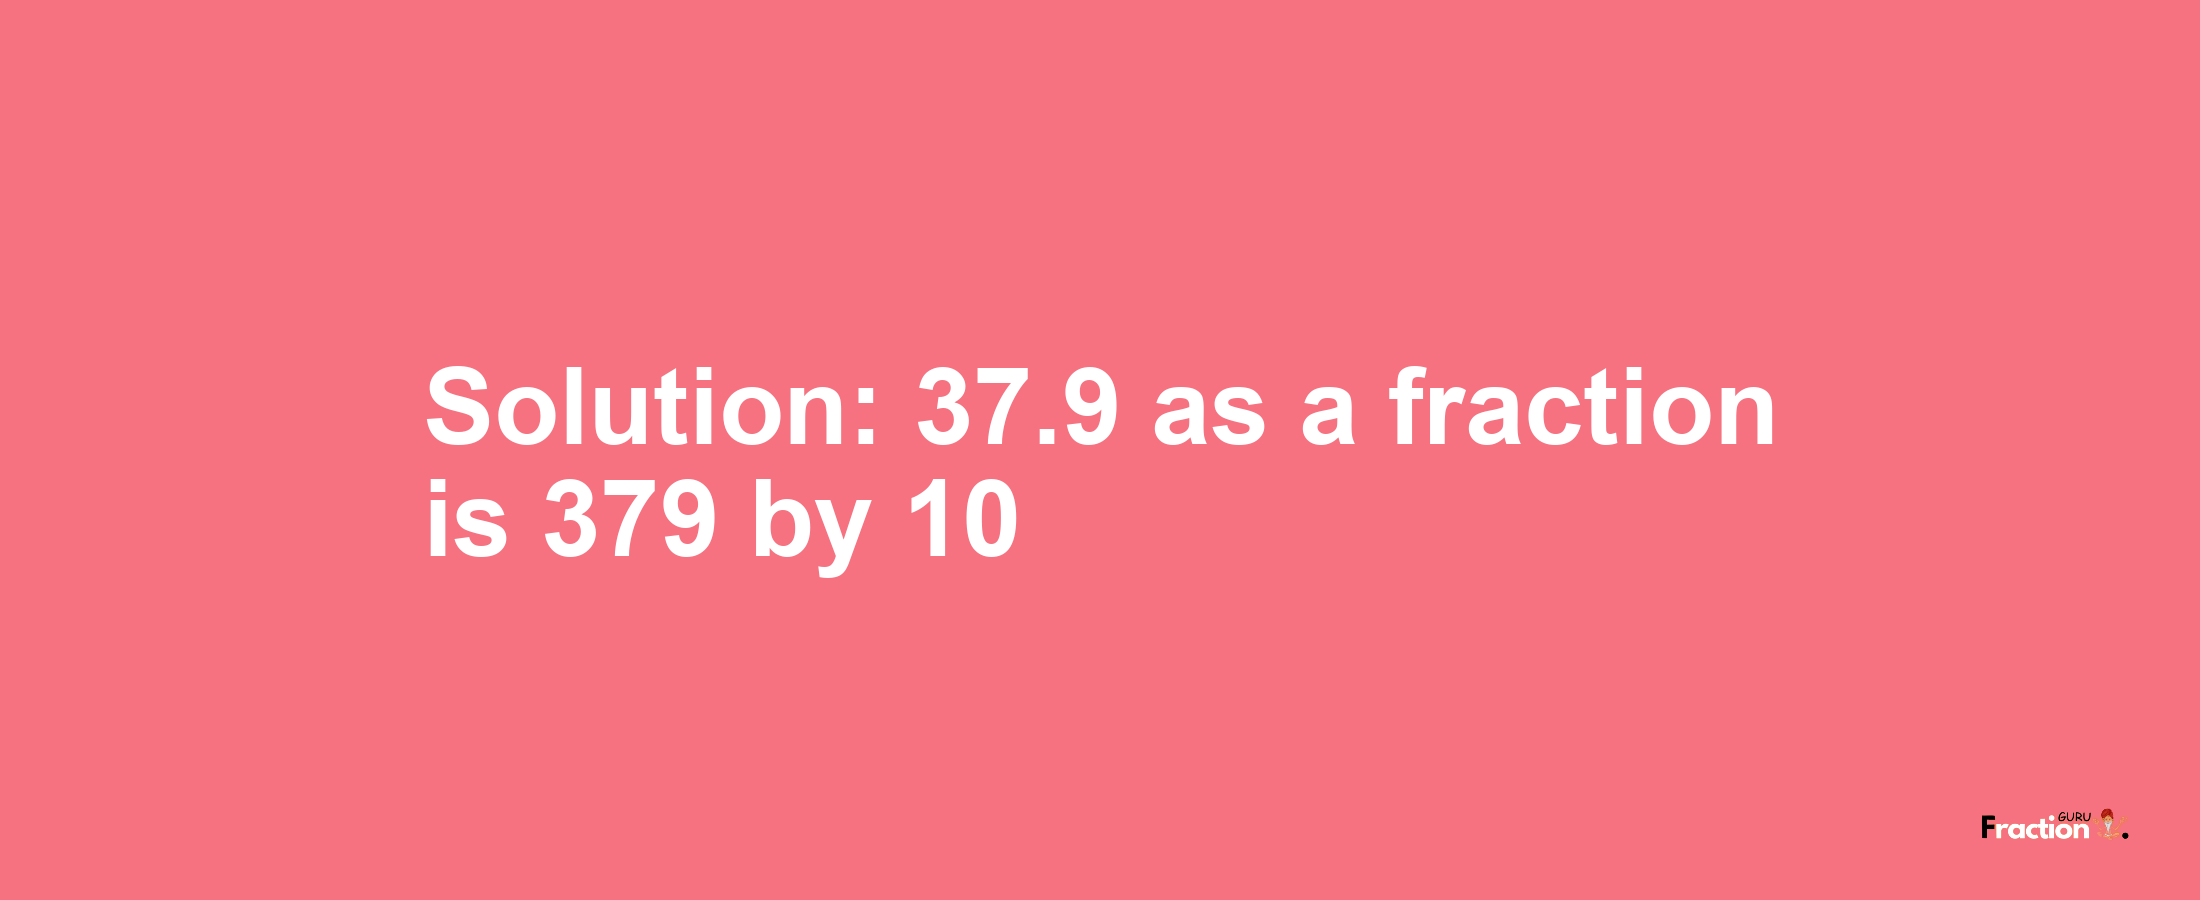 Solution:37.9 as a fraction is 379/10